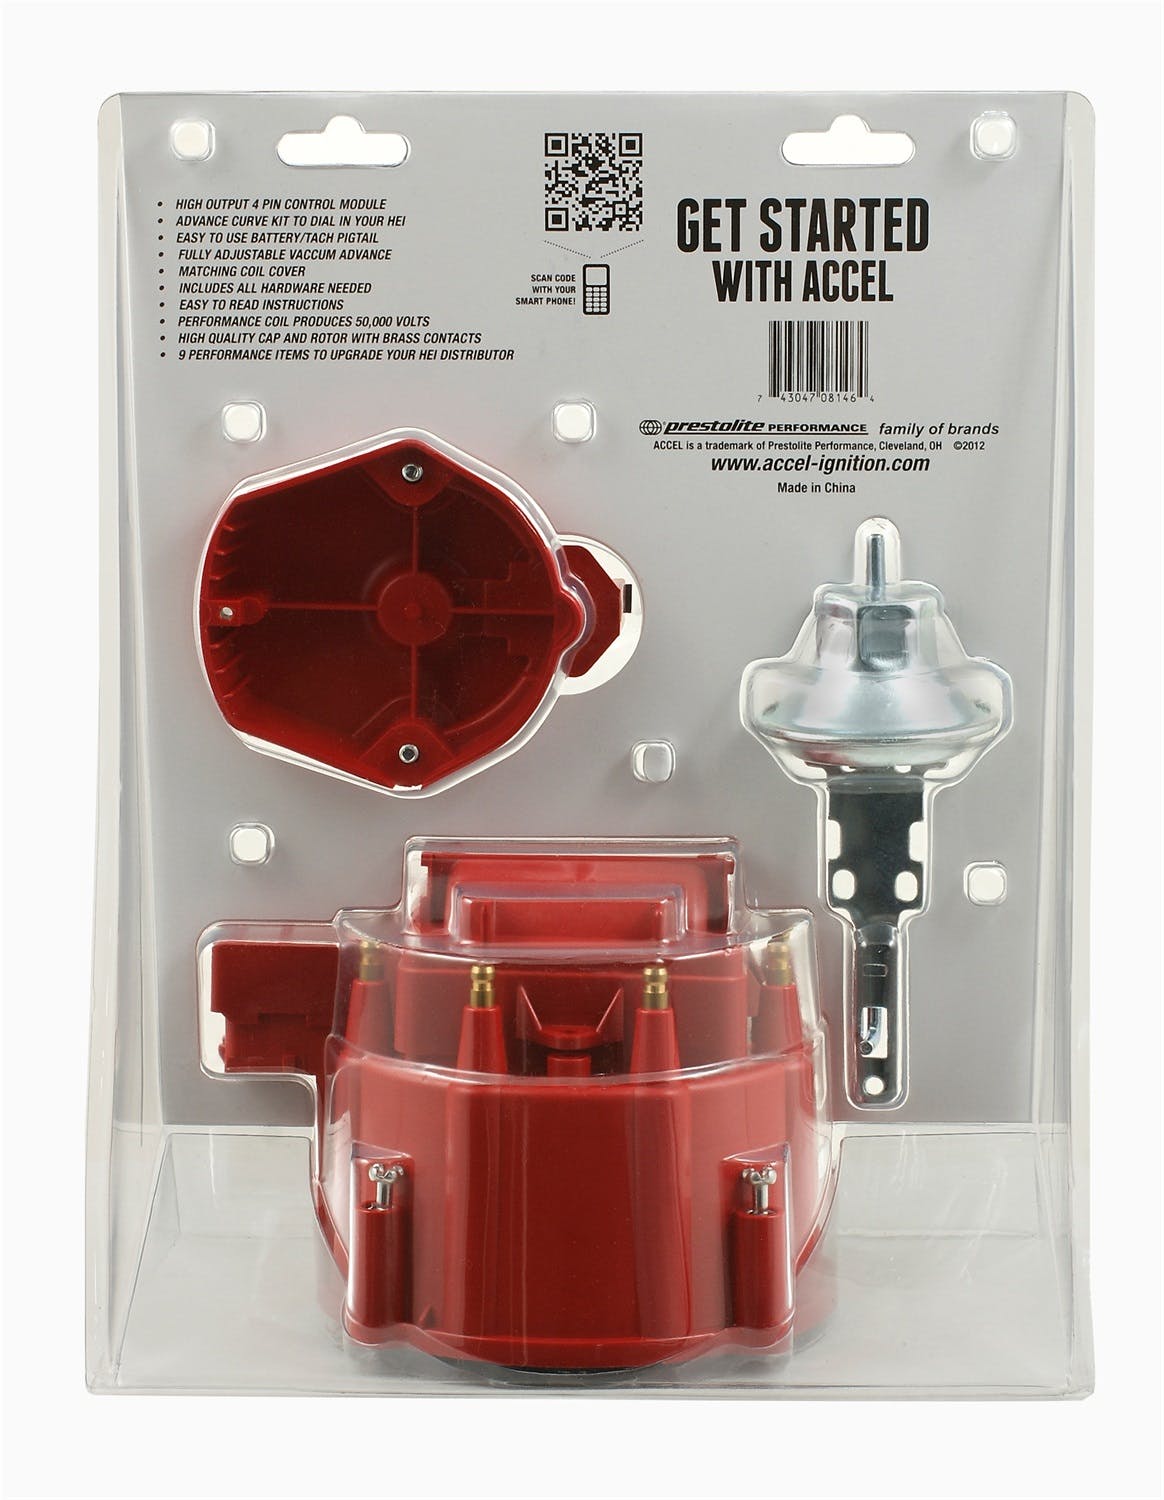 ACCEL 8200ACC TUNE UP KIT,GM HEI RED